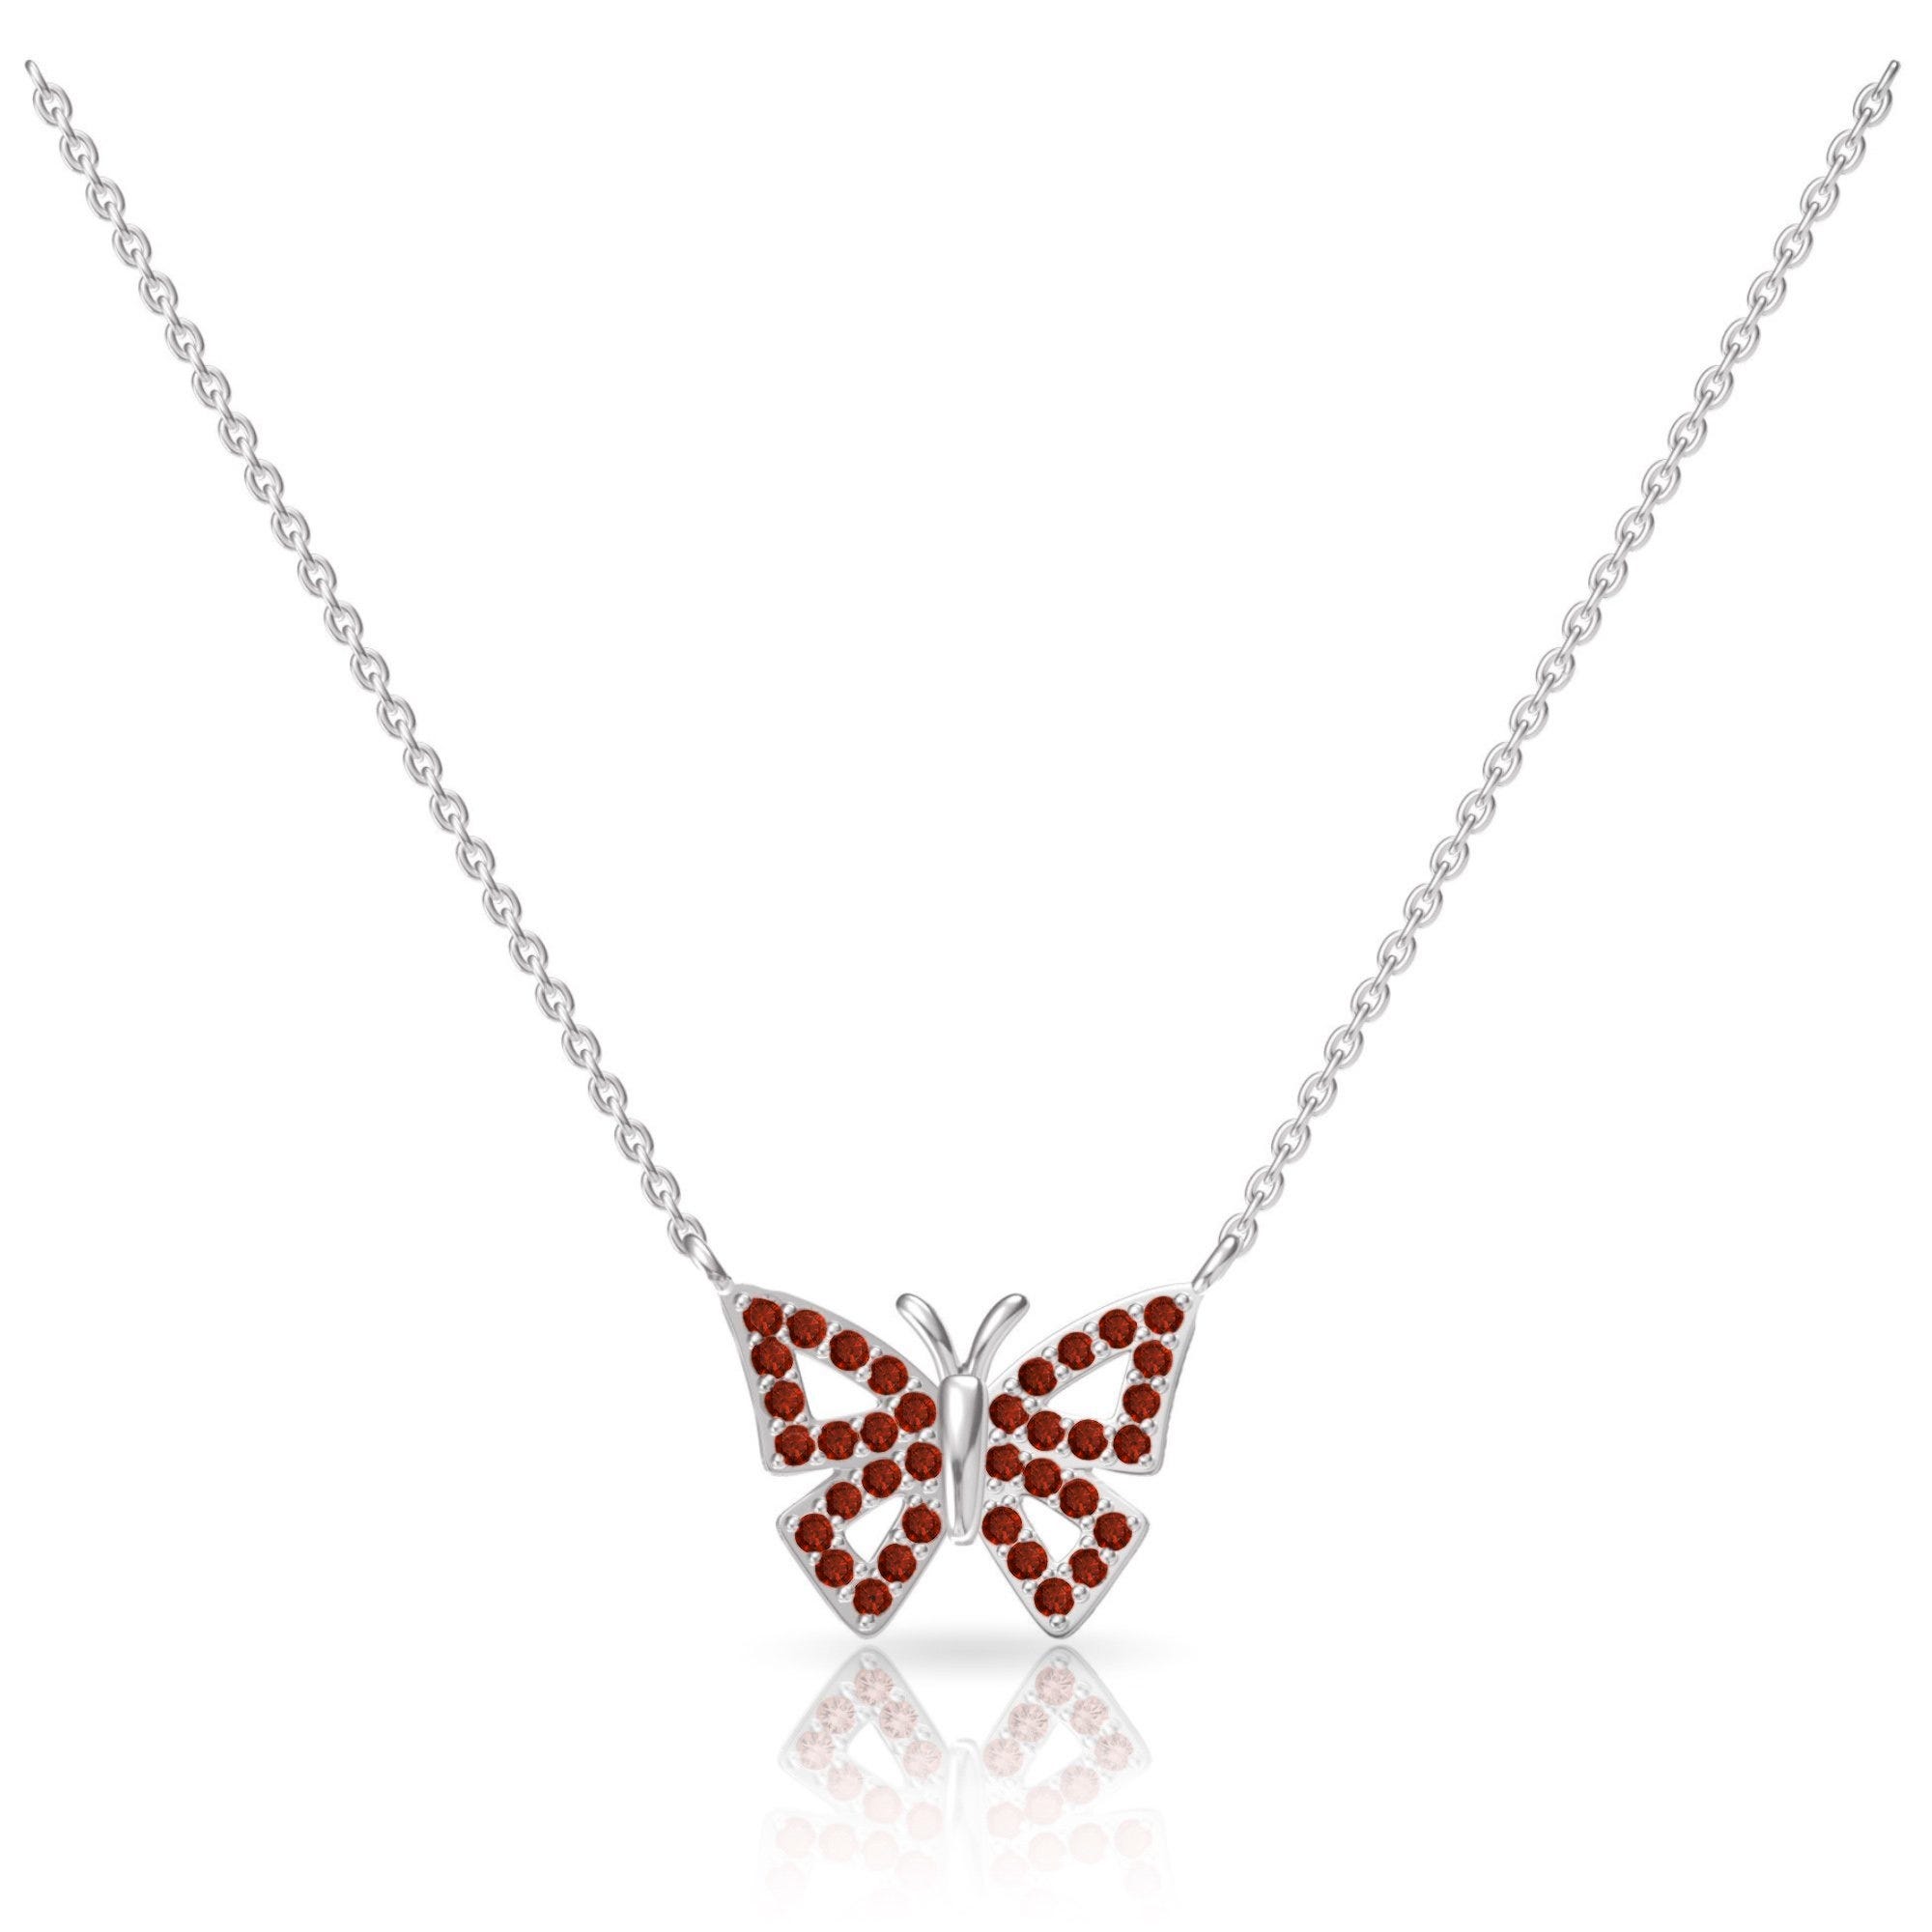 Silver chain necklace with a butterfly pendant adorned with red gemstones.